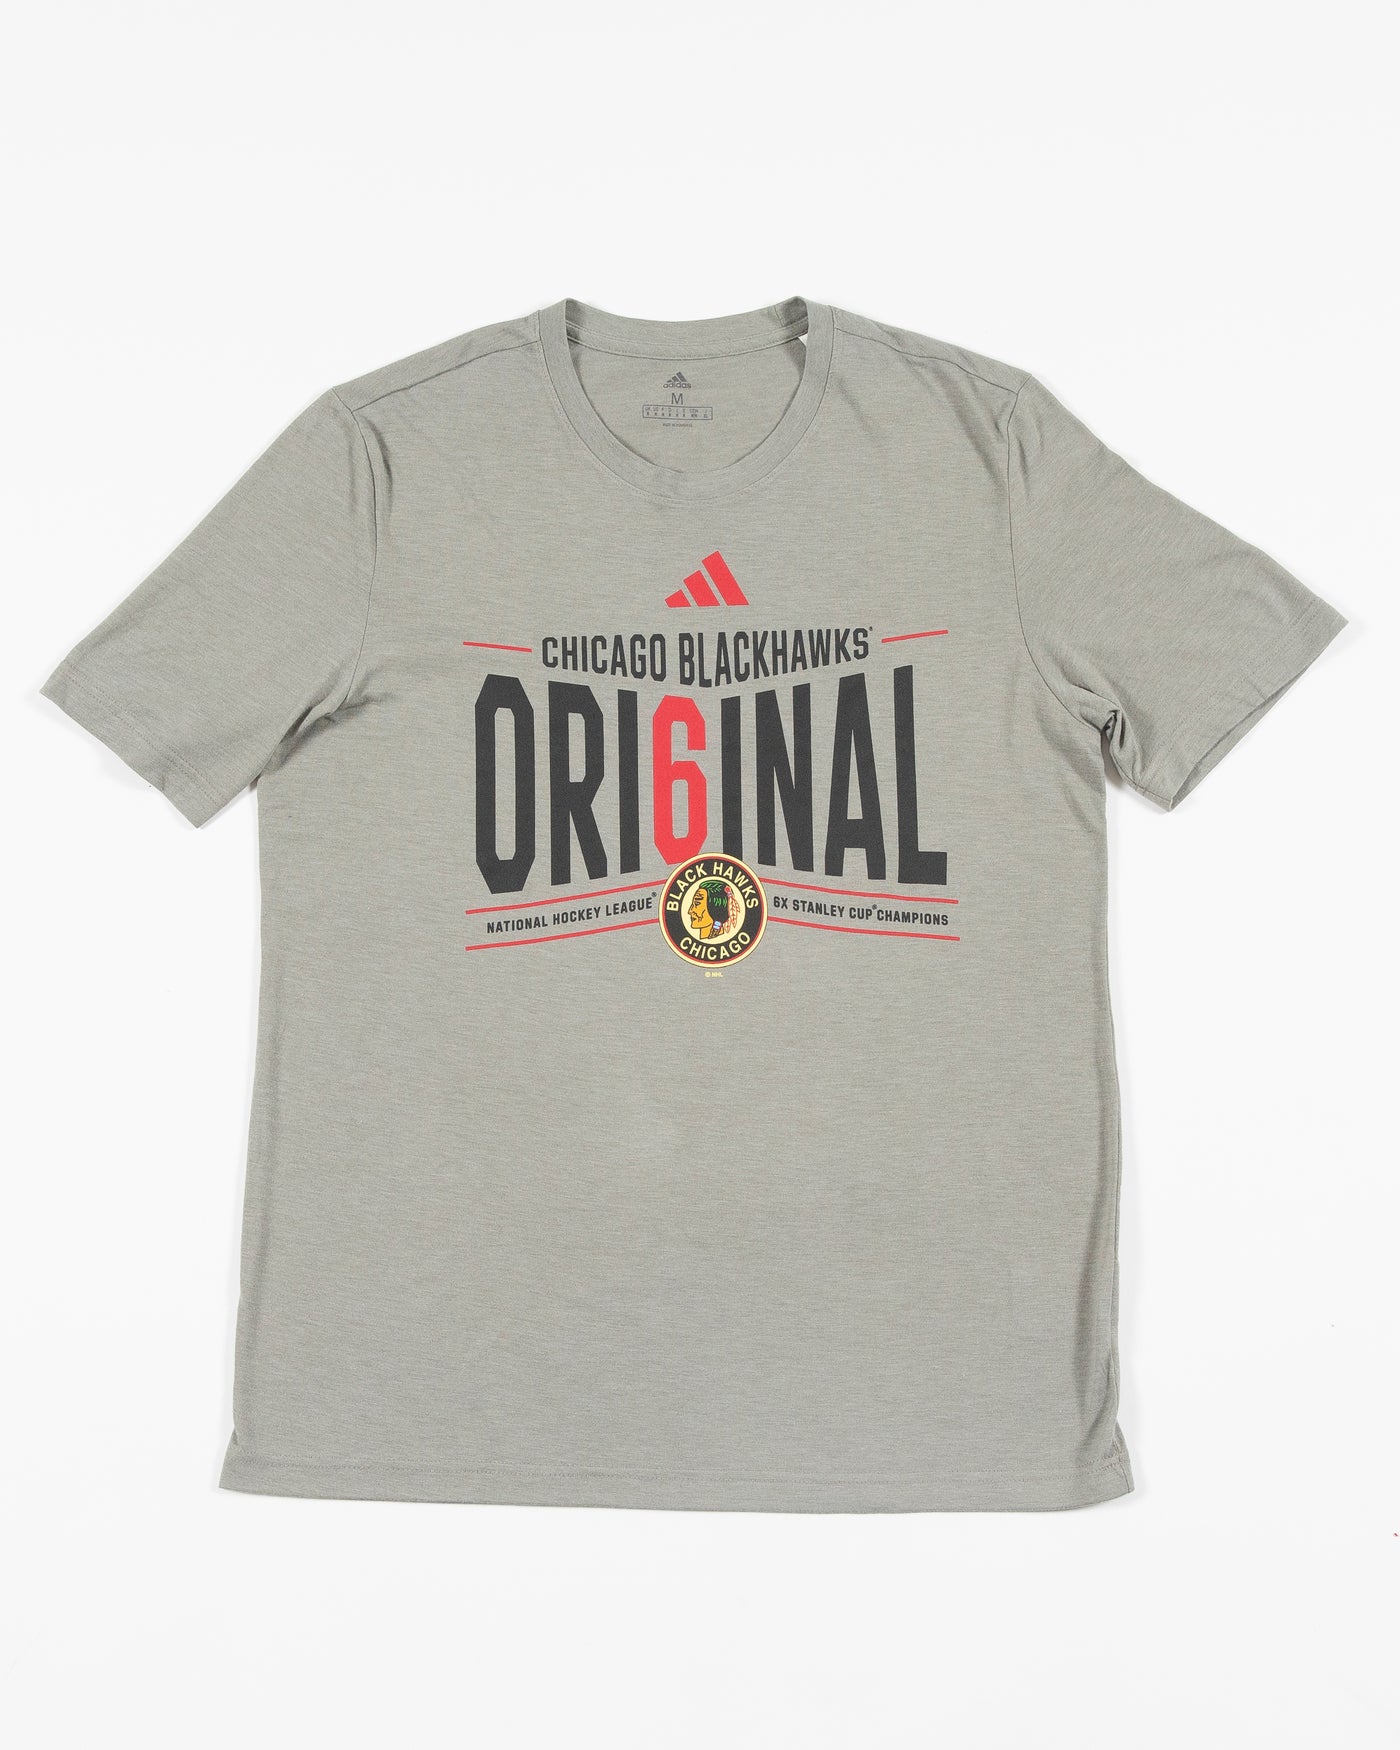 grey adidas t-shirt with vintage Chicago Blackhawks primary logo and Original 6 graphic across chest - front lay flat